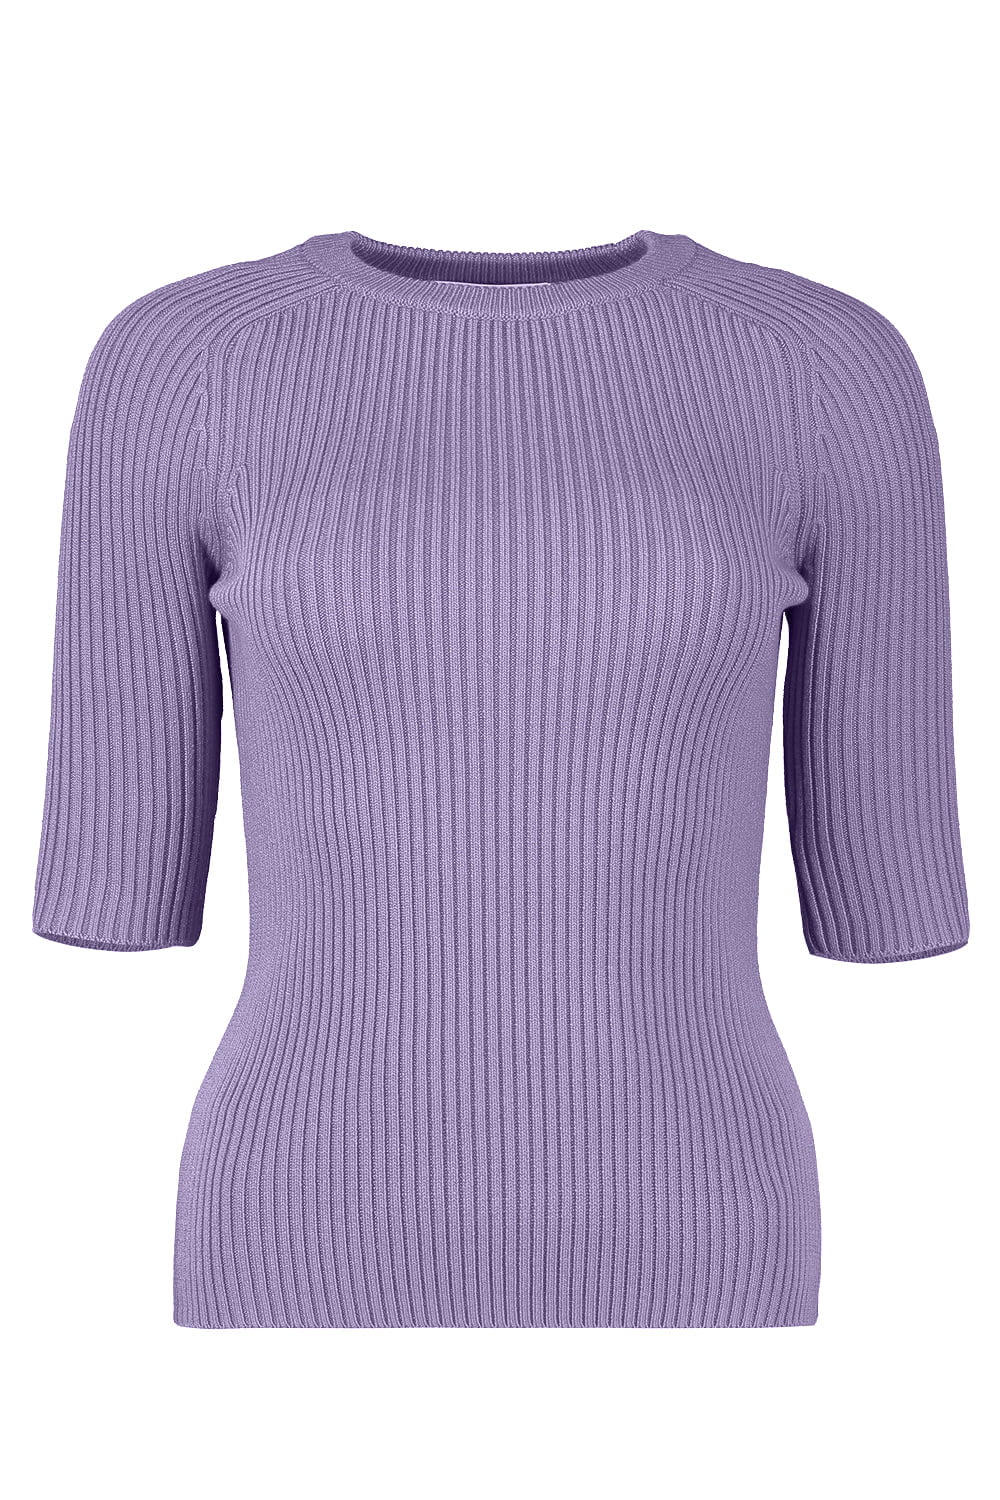 Elbow Sleeve Pullover - Violet CLOTHINGTOPT-SHIRT MICHAEL KORS COLLECTION   